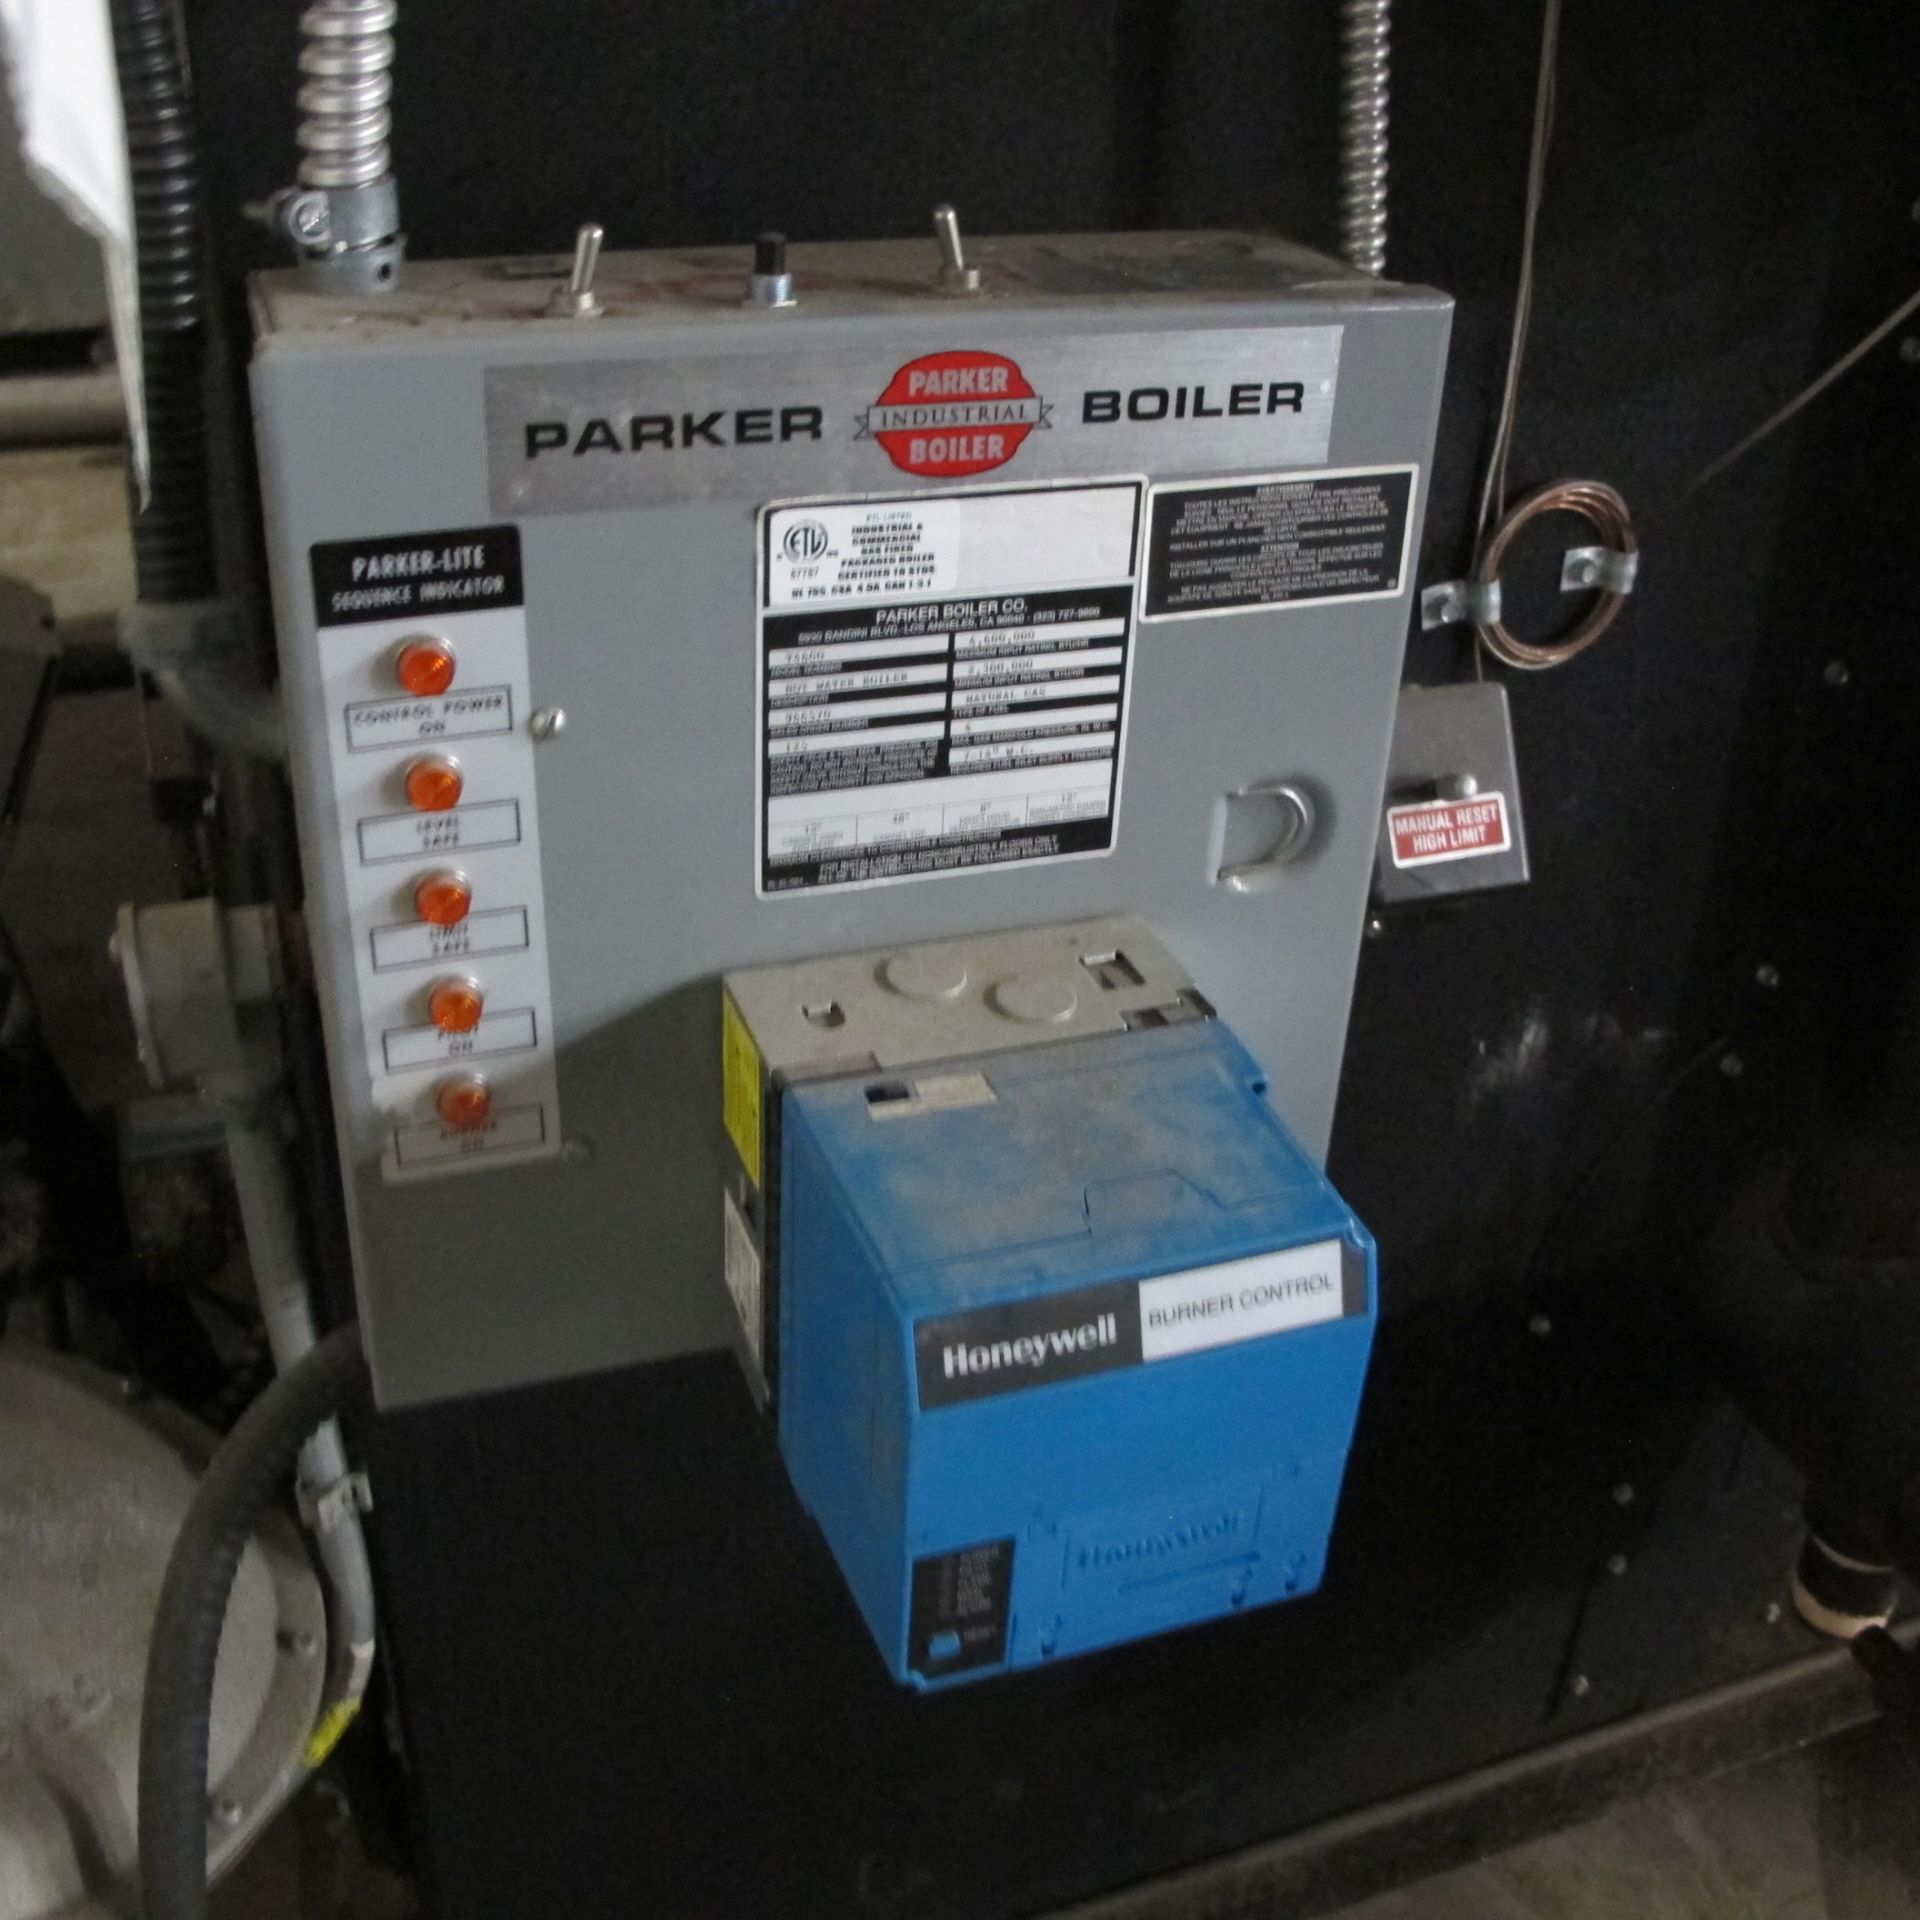 2012 PARKER T4600 NATURAL GAS BOILER, 2,300,000 TO 4,600,000 BTU W/ HONEYWELL GASE PIPE/VALVES - Image 2 of 10